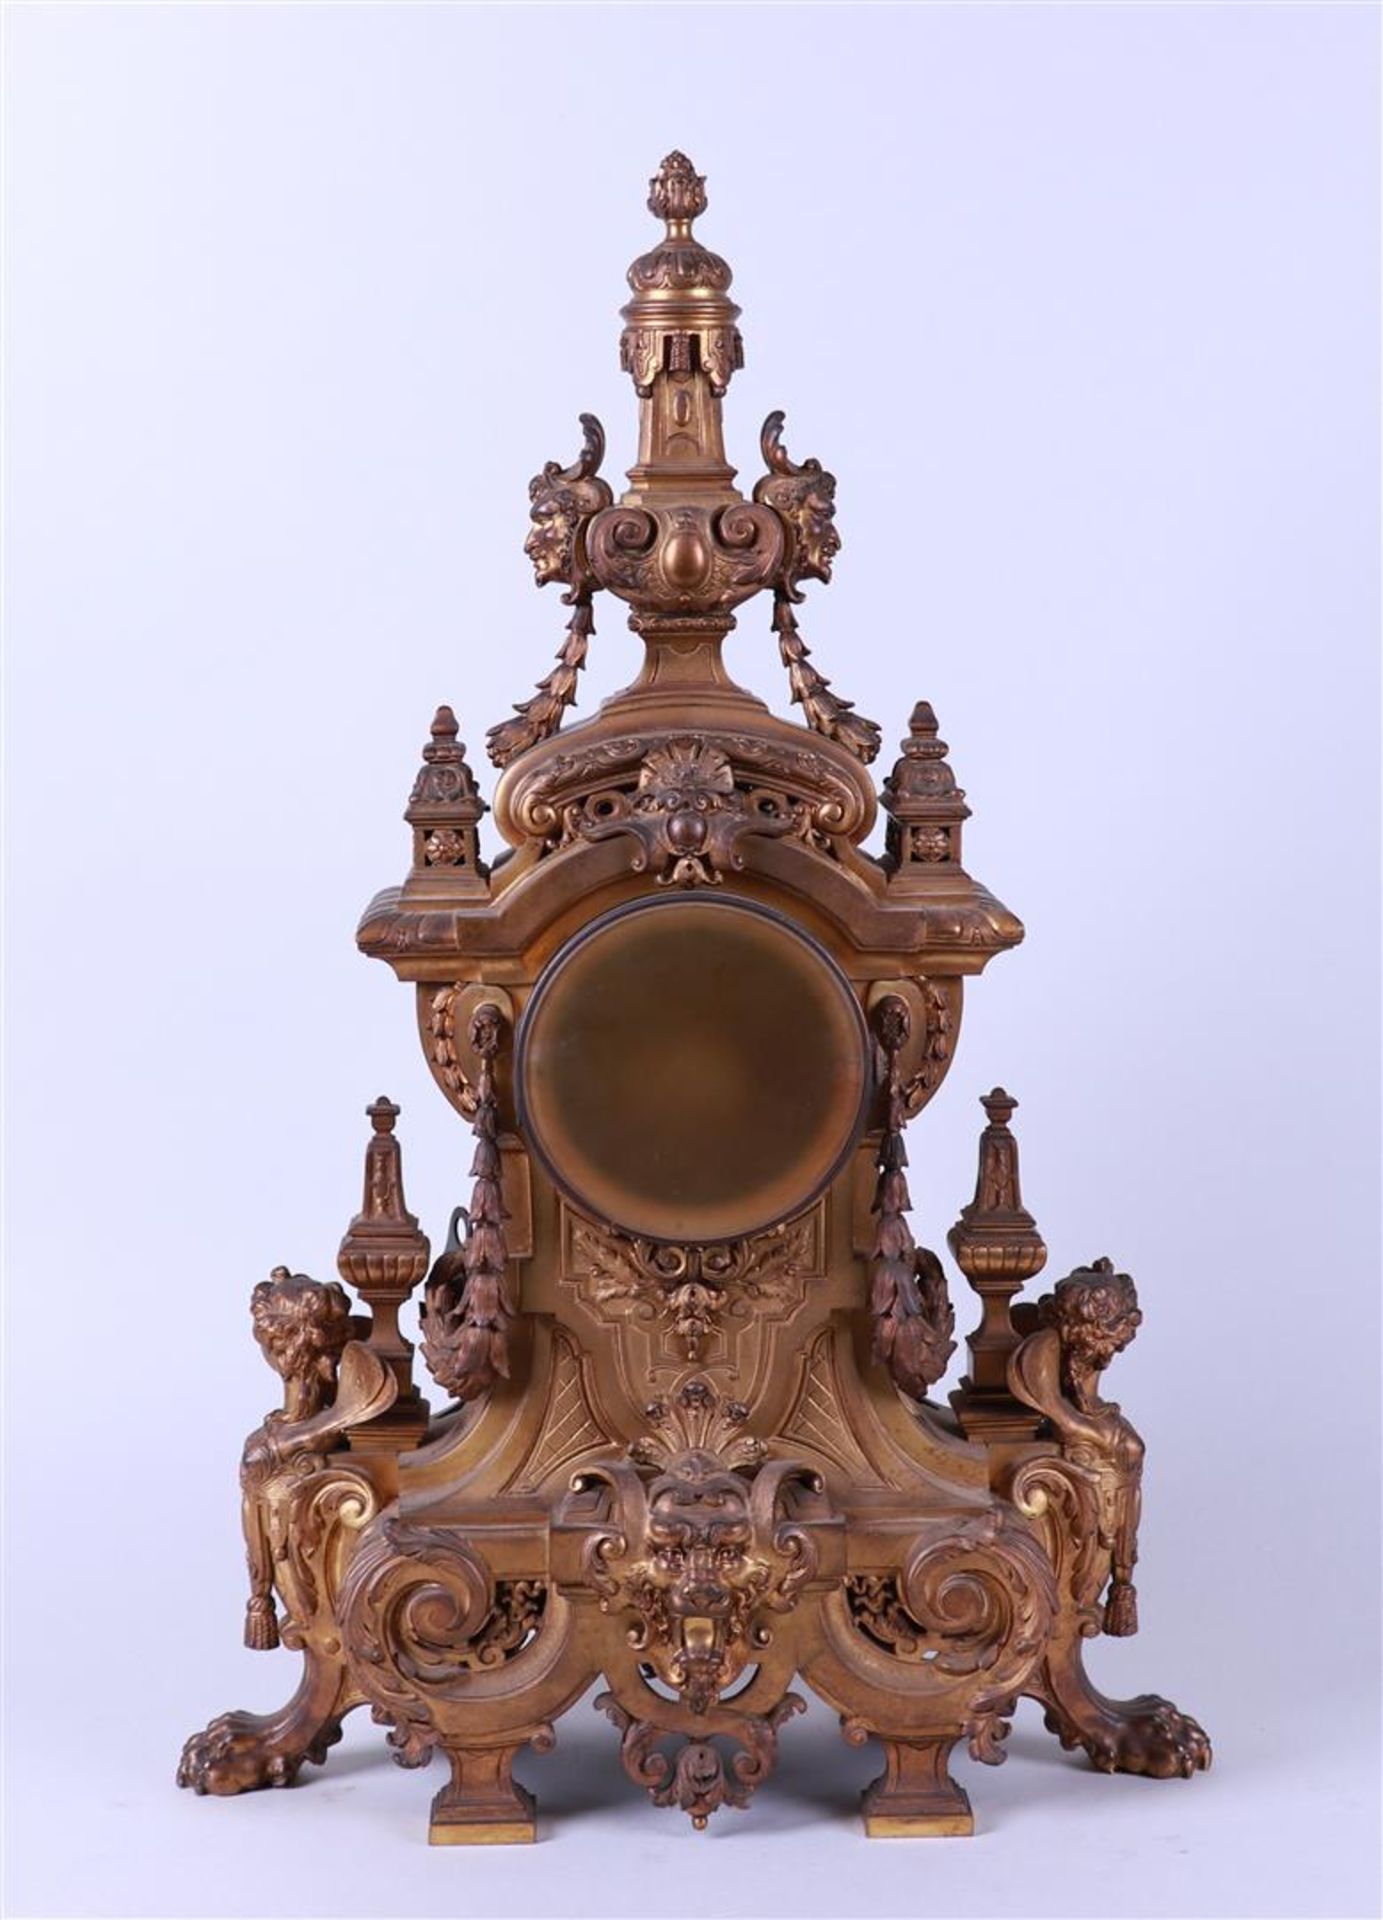 Cast Bronze Clock Set in Louis XVI Style (France, 19th Century) - Image 3 of 9